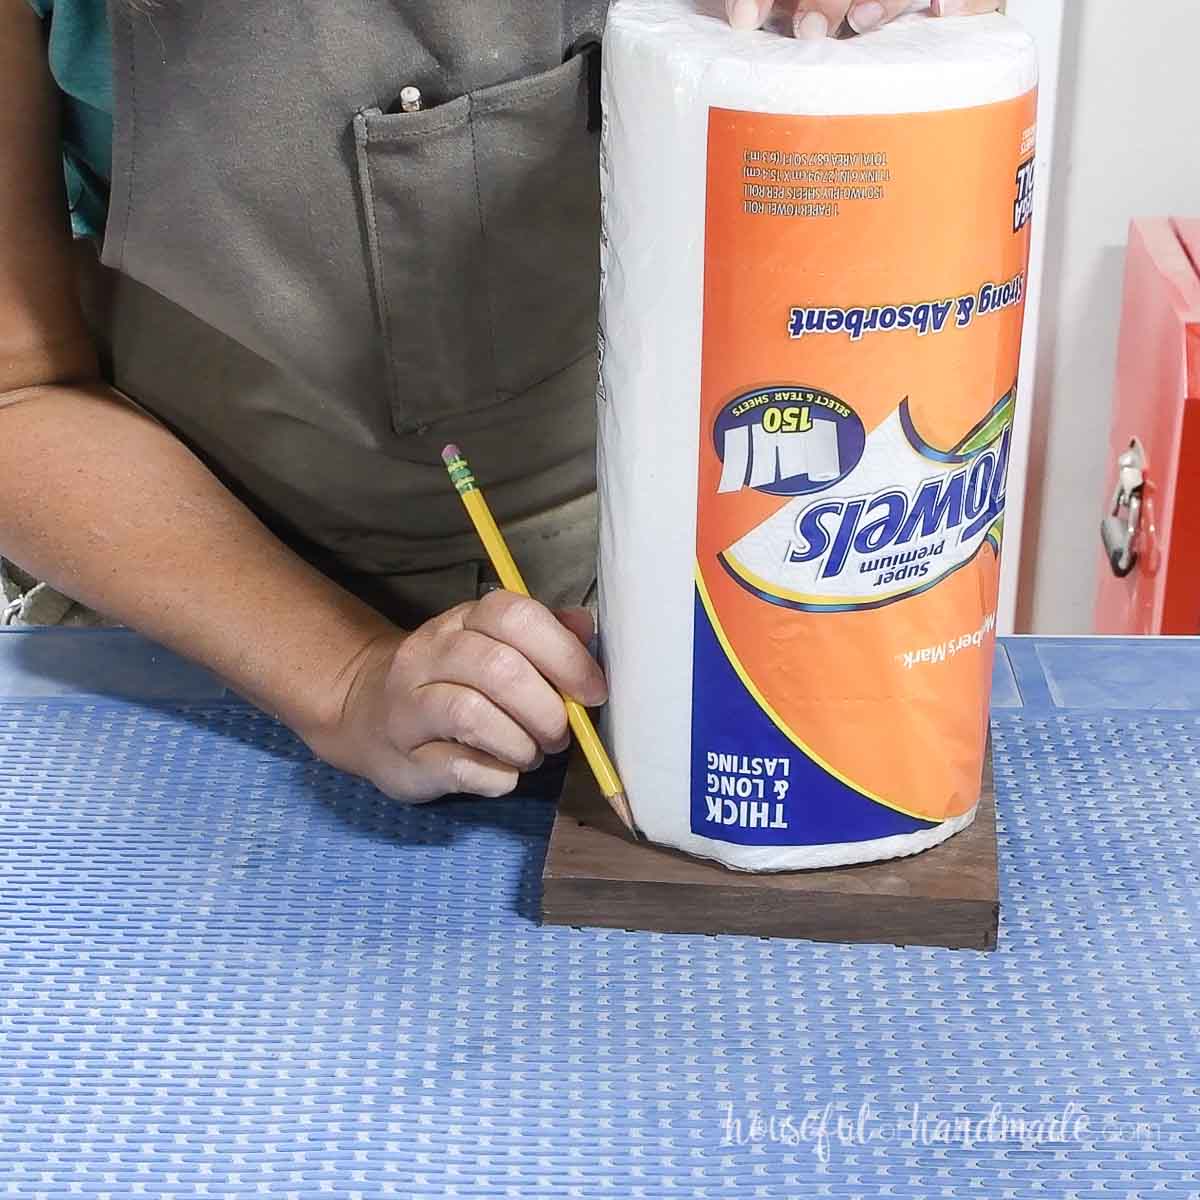 Drawing the edge of the paper towel roll onto the board.